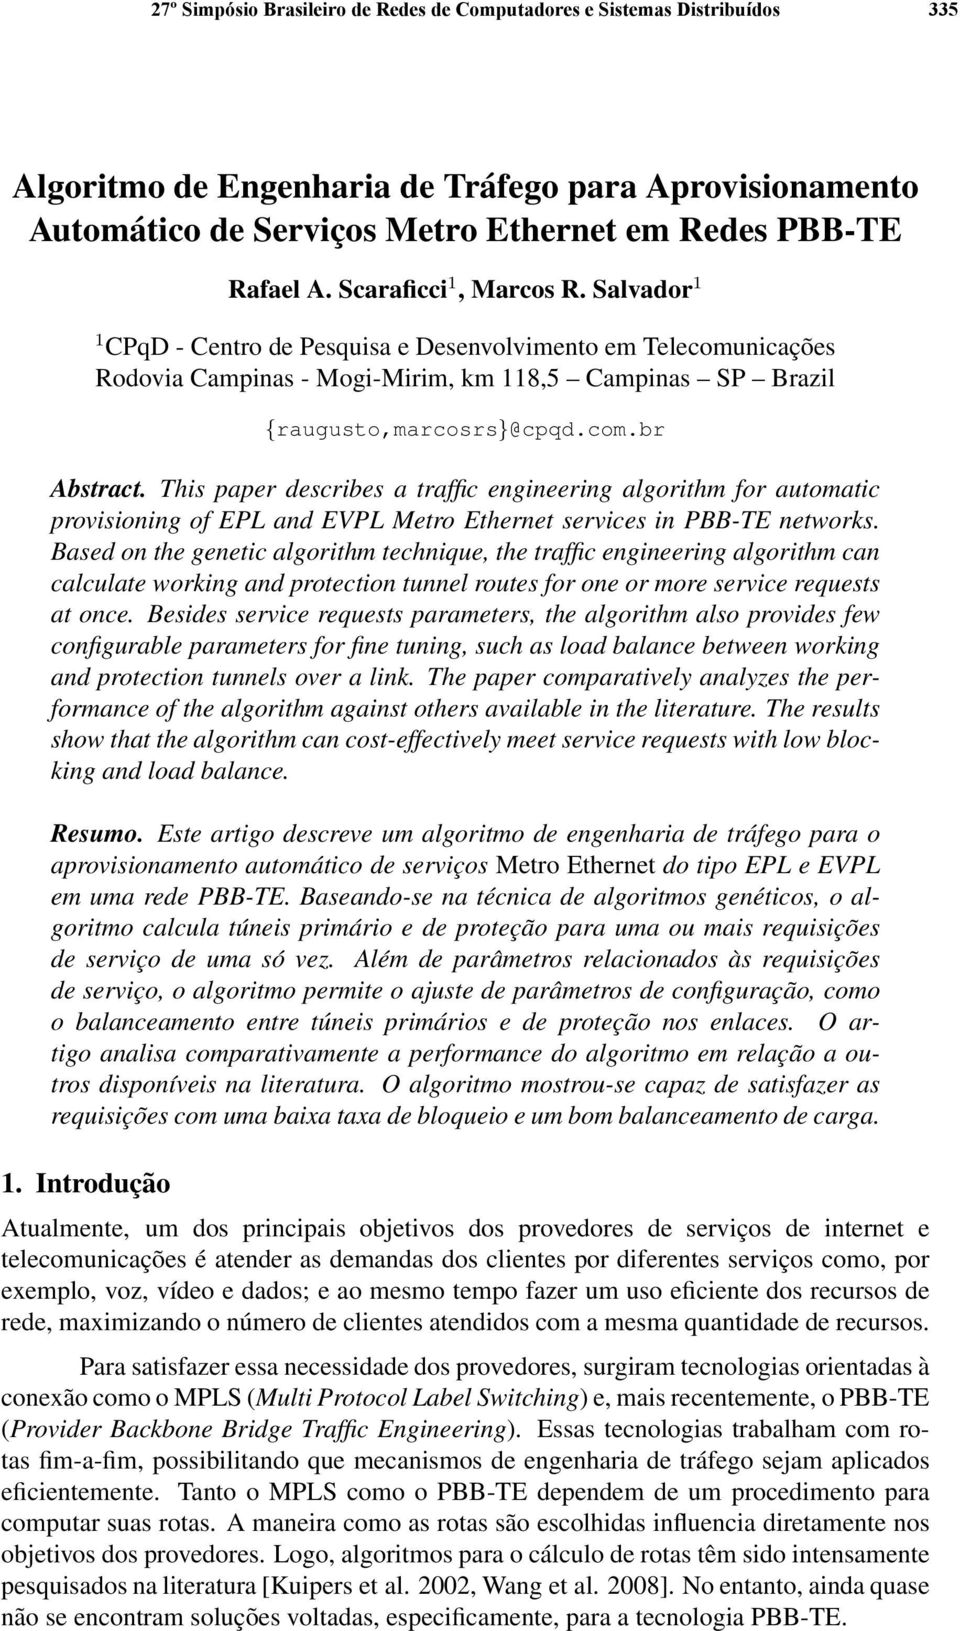 This paper describes a traffic engineering algorithm for automatic provisioning of EPL and EVPL Metro Ethernet services in PBB-TE networks.